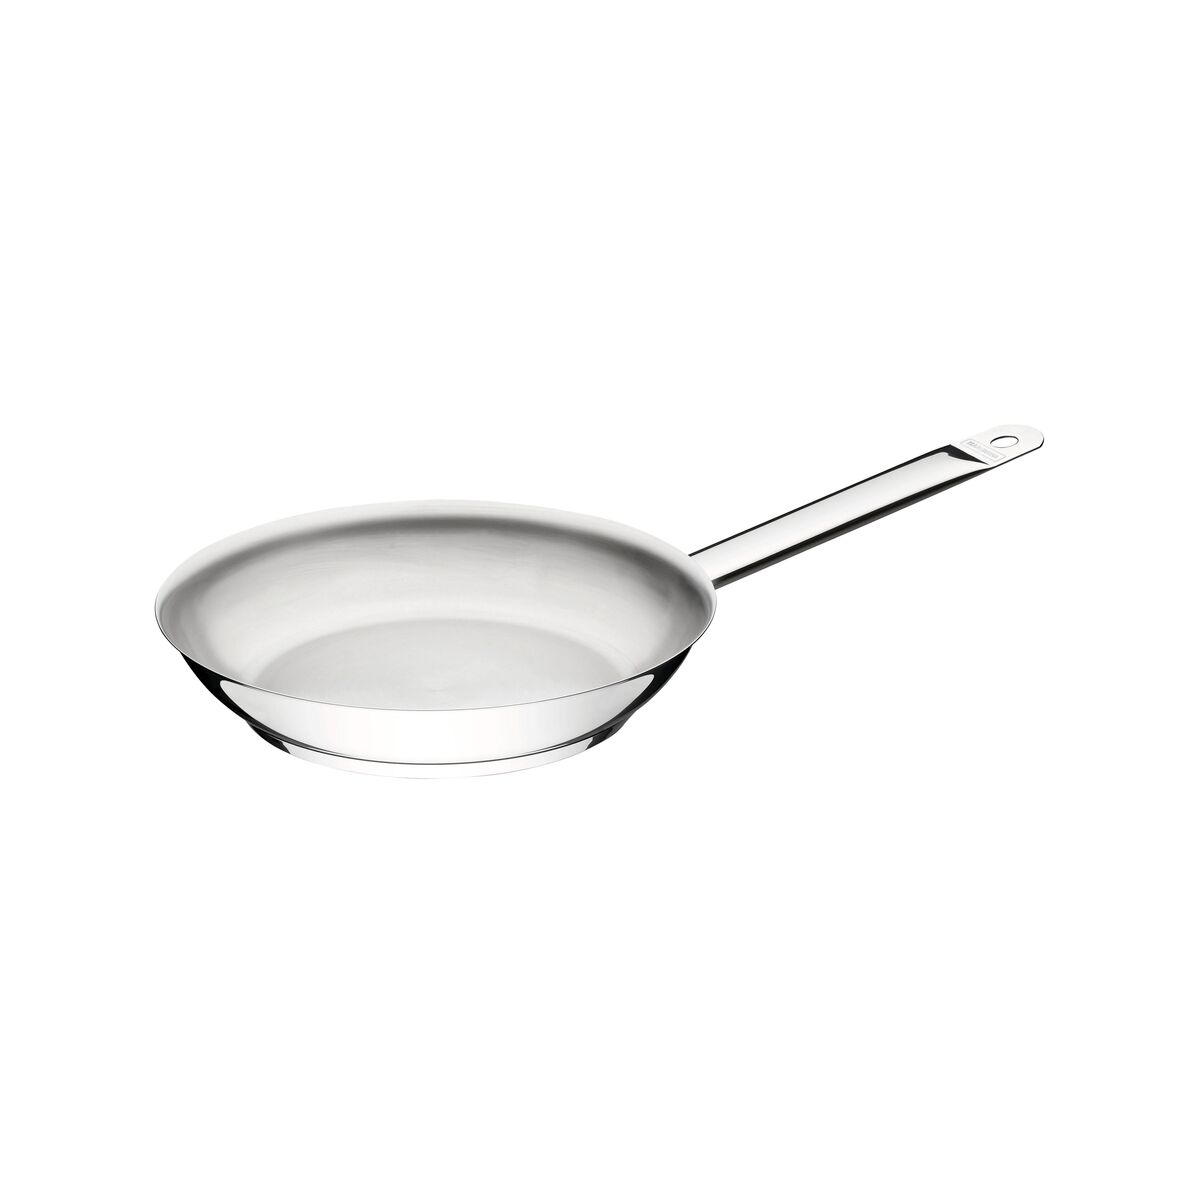 Tramontina Professional 20 cm 1.1 L shallow stainless steel frying pan with long handle and tri-ply base